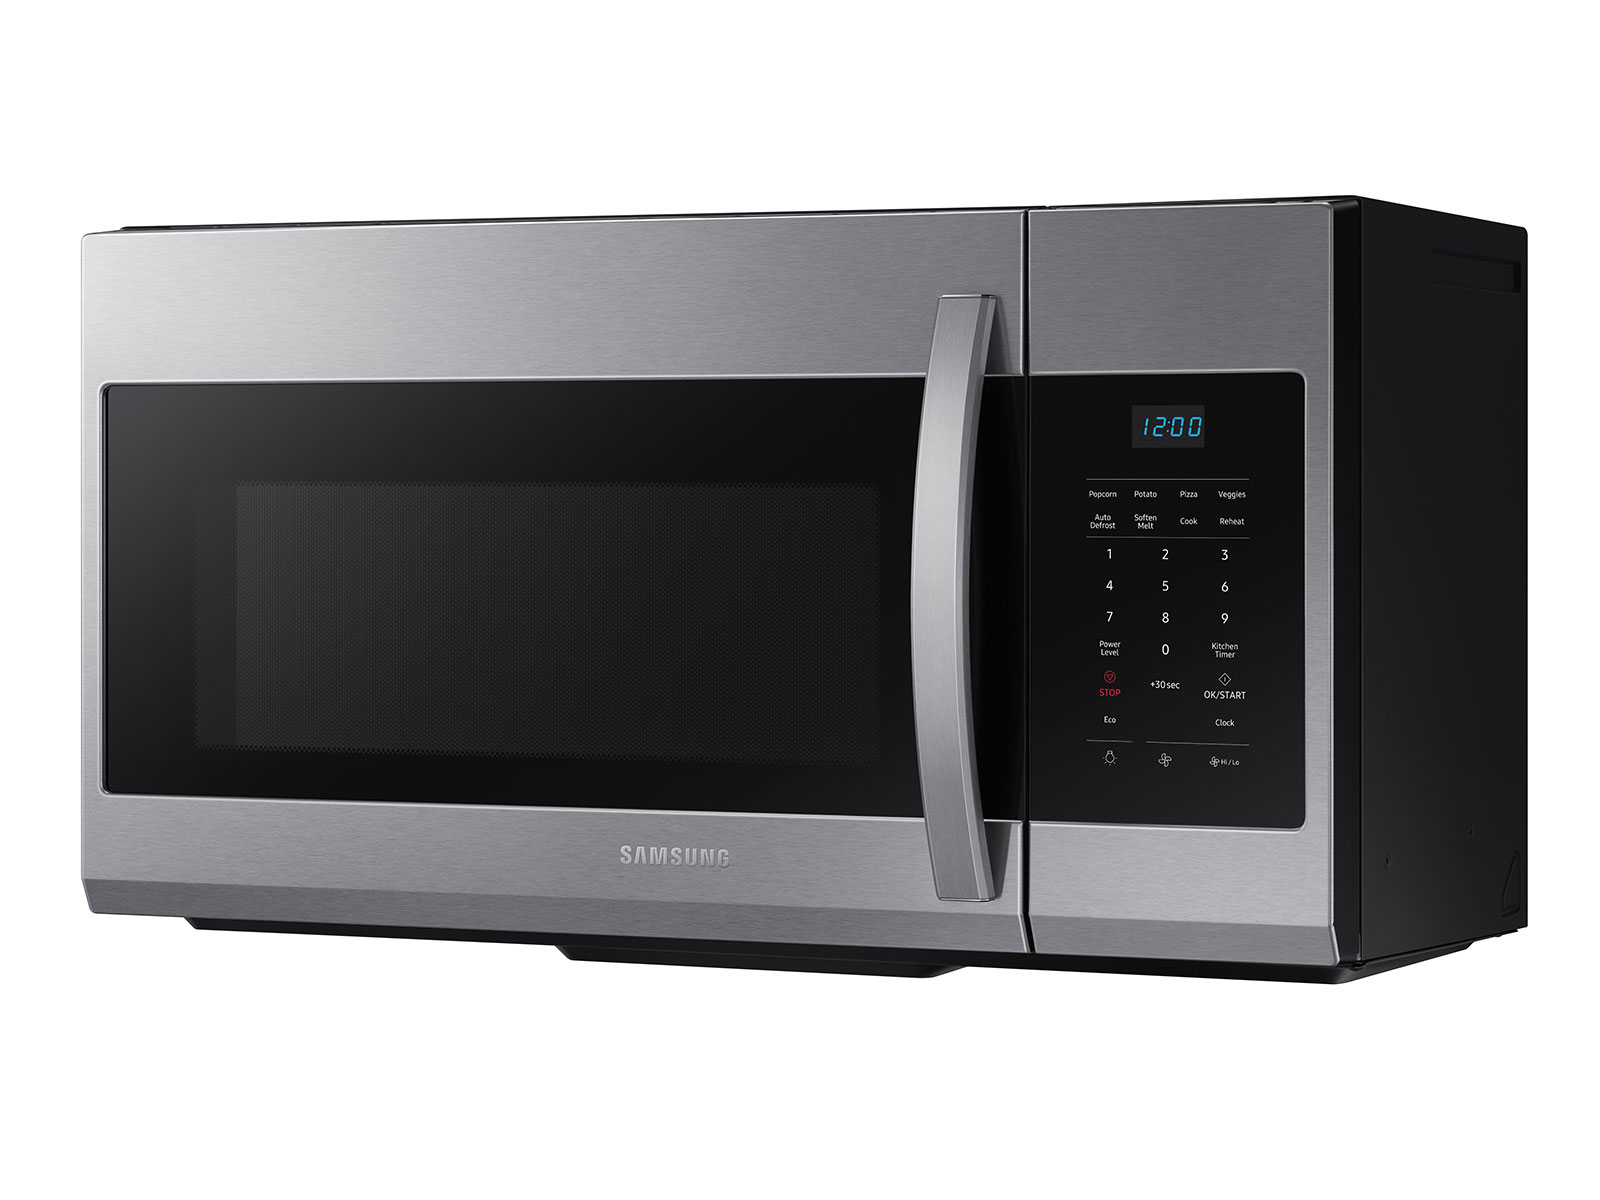 https://image-us.samsung.com/SamsungUS/home/home-appliances/microwaves/over-the-range/pdp/-me17r7021e/silver/PDP-GALLERY-R7021-003-Silver-1600x1200.jpg?$product-details-jpg$